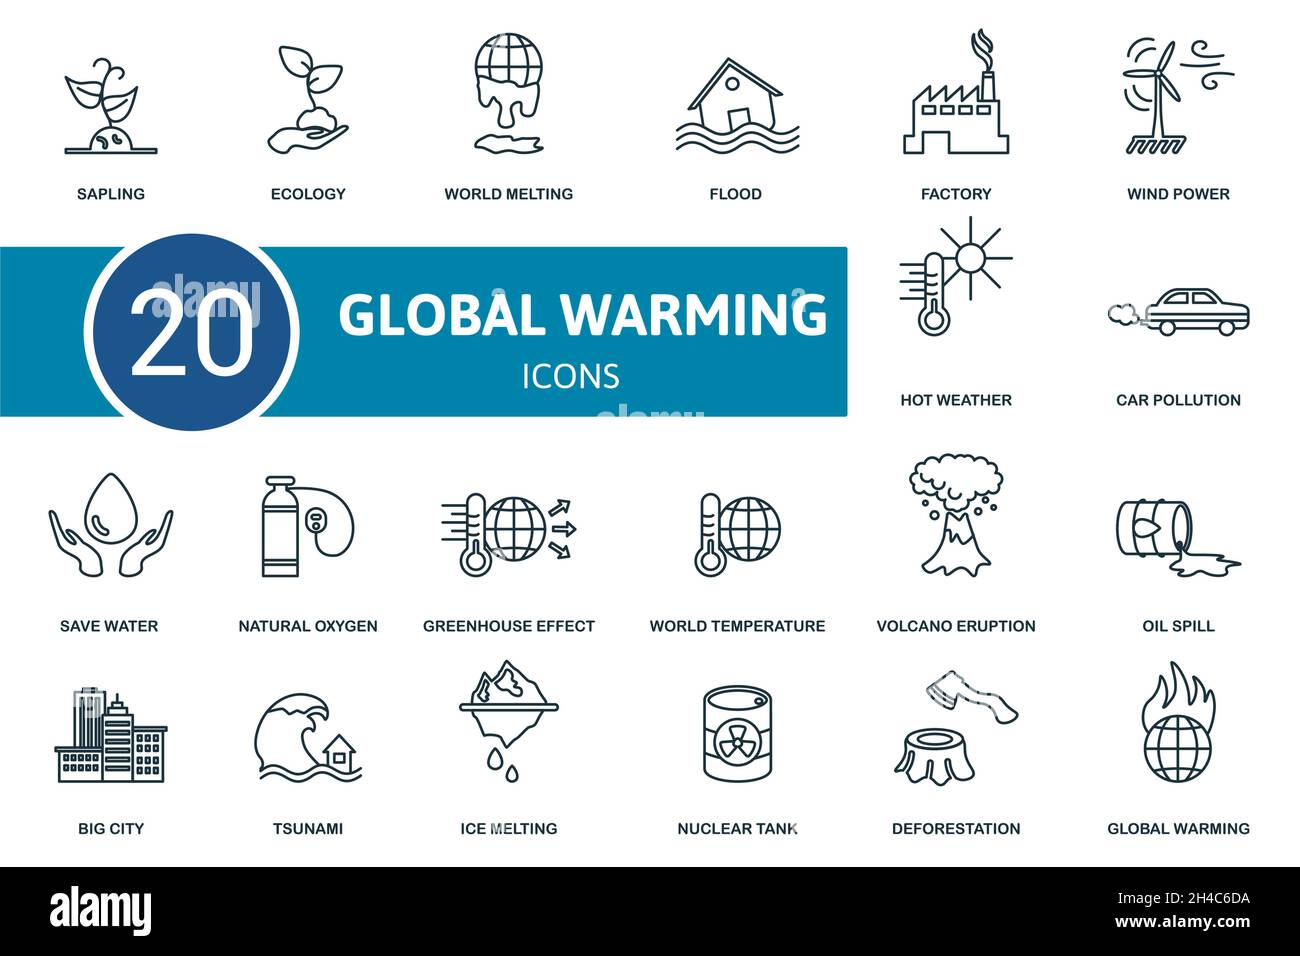 Global Warming icon set. Collection of simple elements such as the sapling, ecology, world melting, car pollution, save water, greenhouse effect Stock Vector